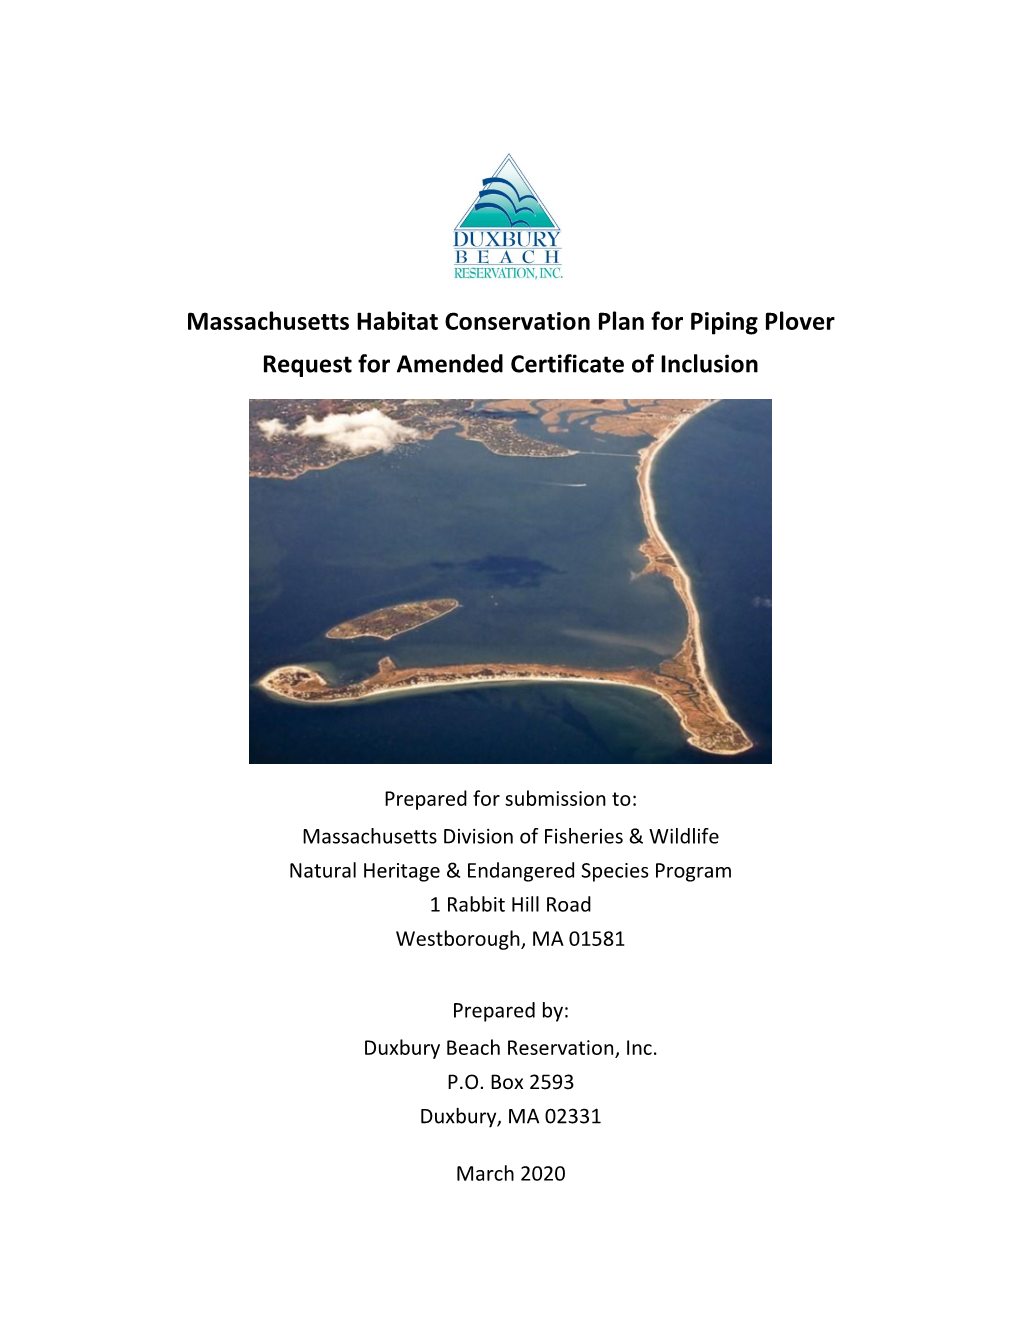 Massachusetts Habitat Conservation Plan for Piping Plover Request for Amended Certificate of Inclusion